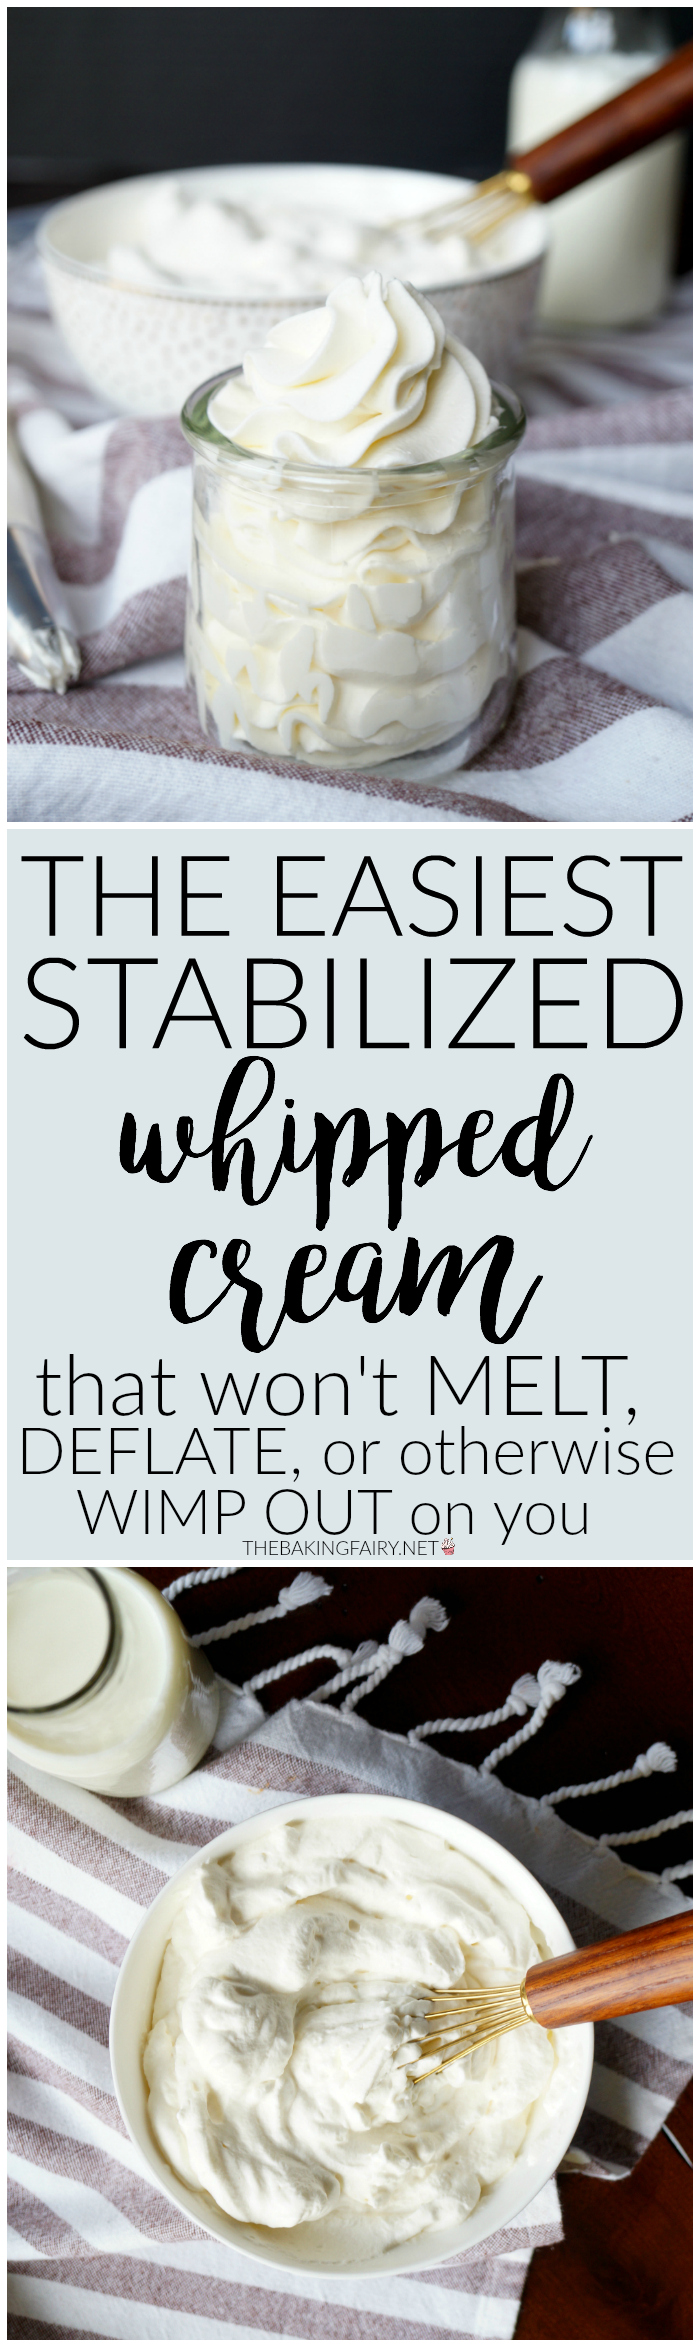 How To Make Stabilized Whipped Cream - Live Well Bake Often